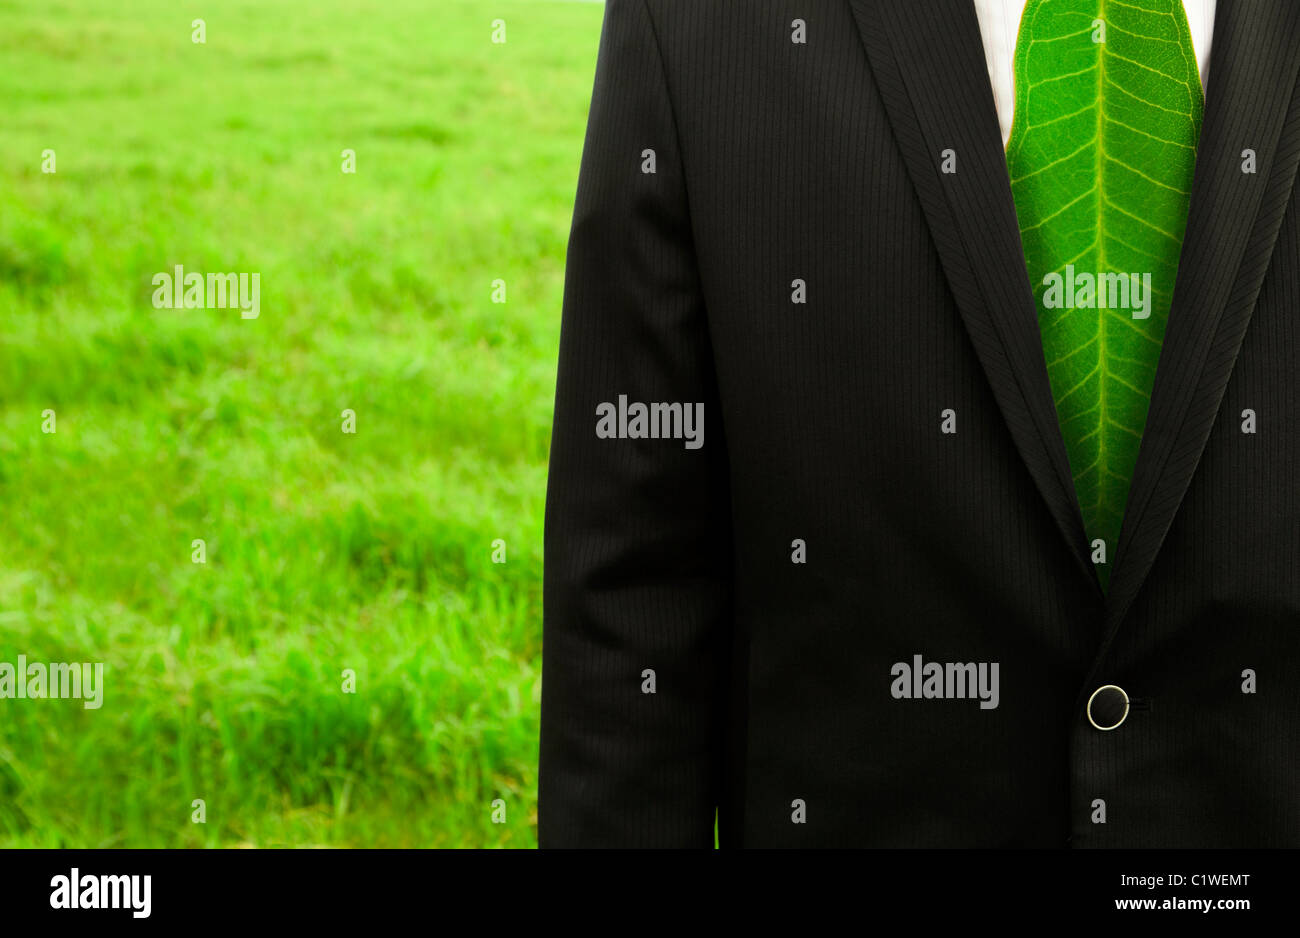 Businessman with green leaf tie on the grass field Stock Photo